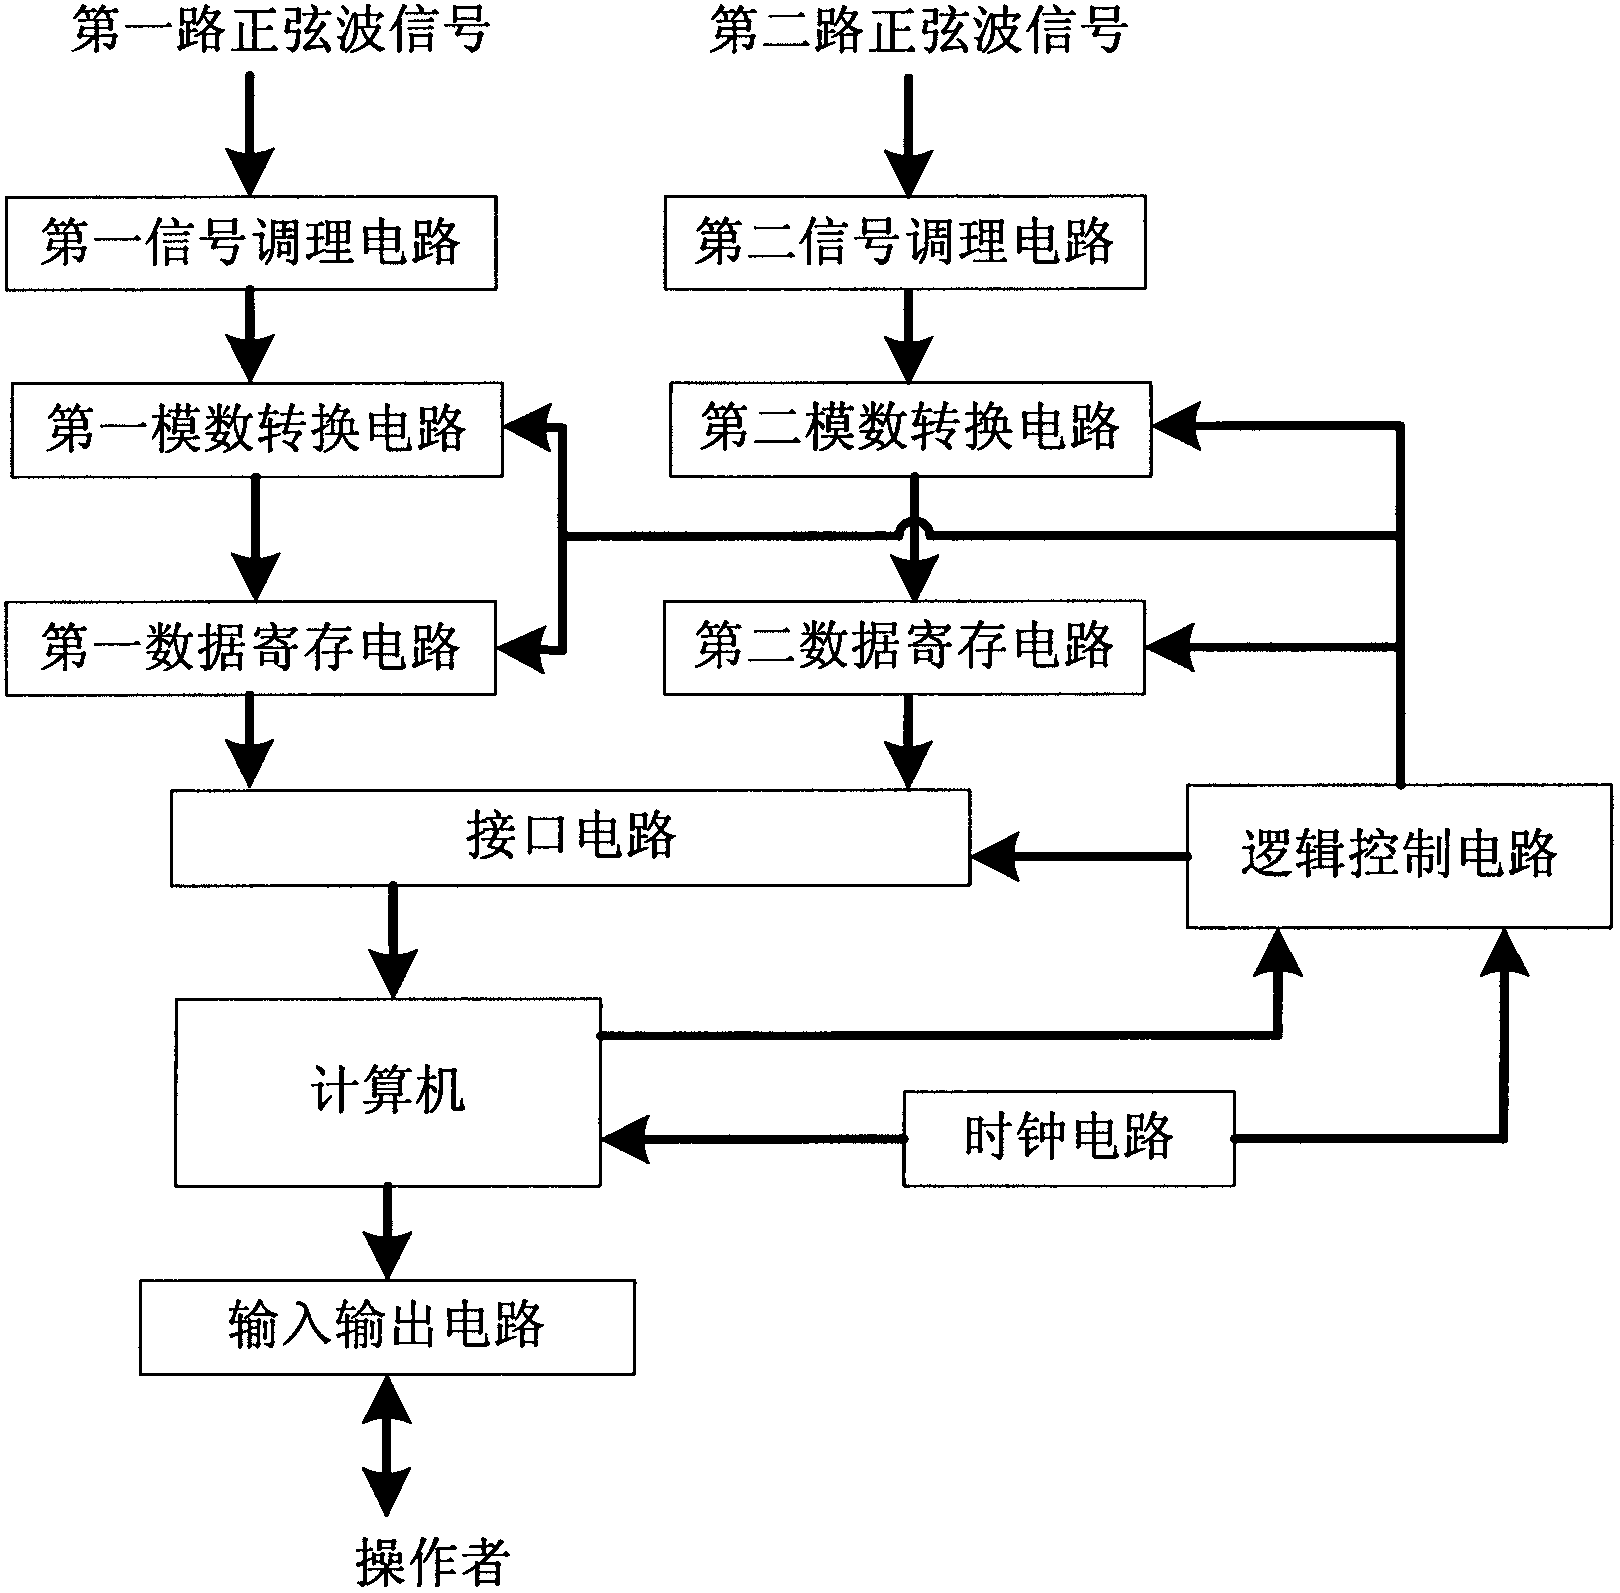 Synchronous rapid measuring method and device for ultralow frequency sinusoidal signal phase difference